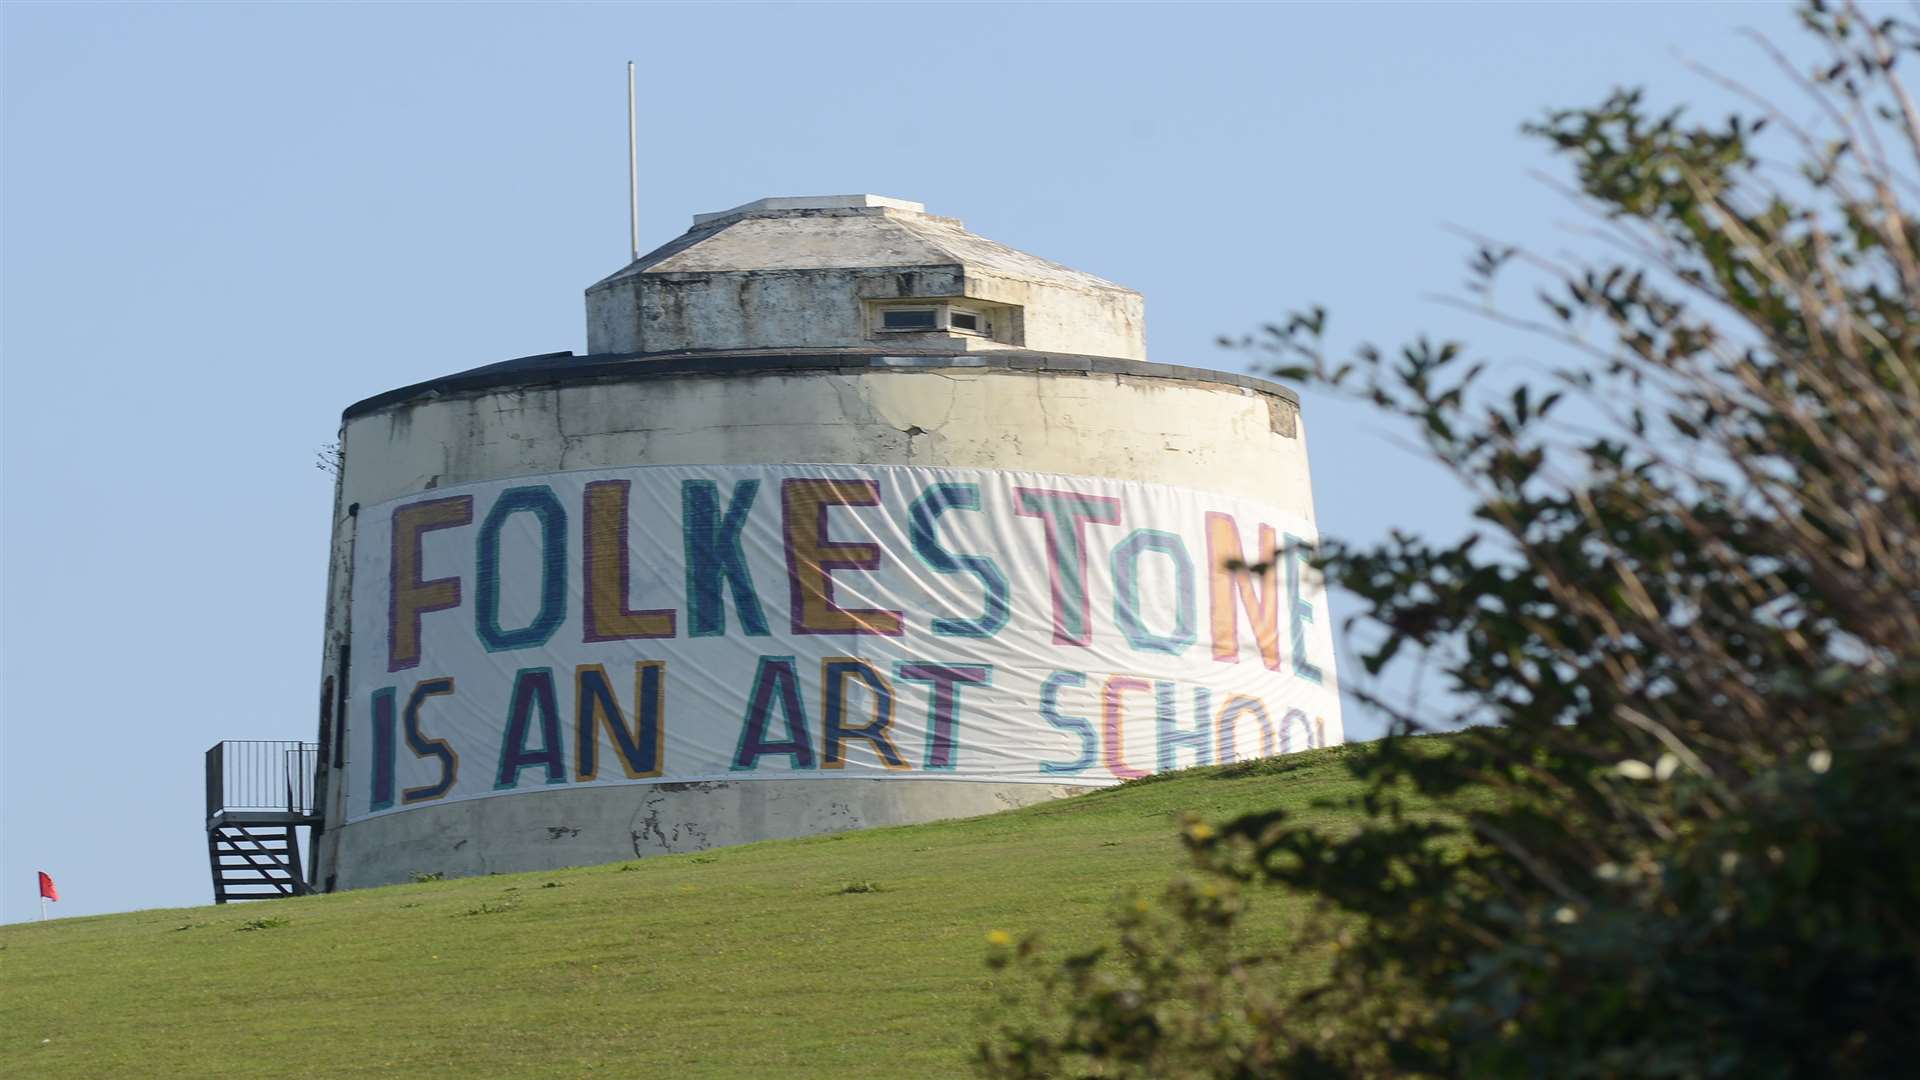 Folkestone Is An Art School by Kent-based Bob and Roberta Smith Picture: Gary Browne